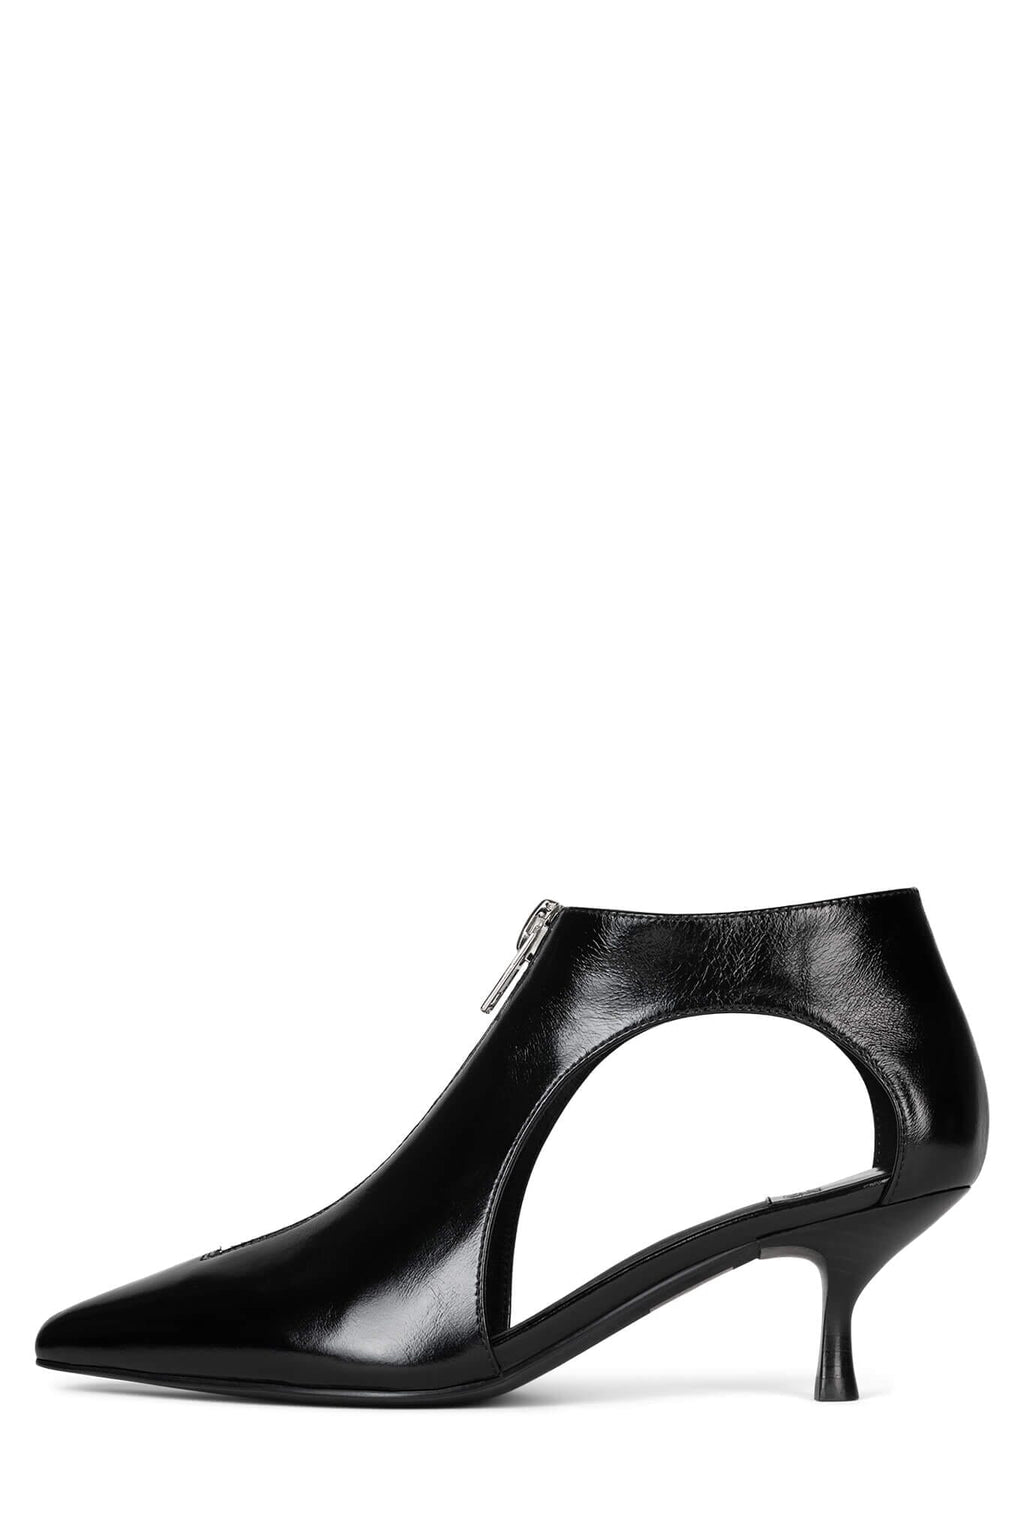 POINTING Jeffrey Campbell Black Silver 6 